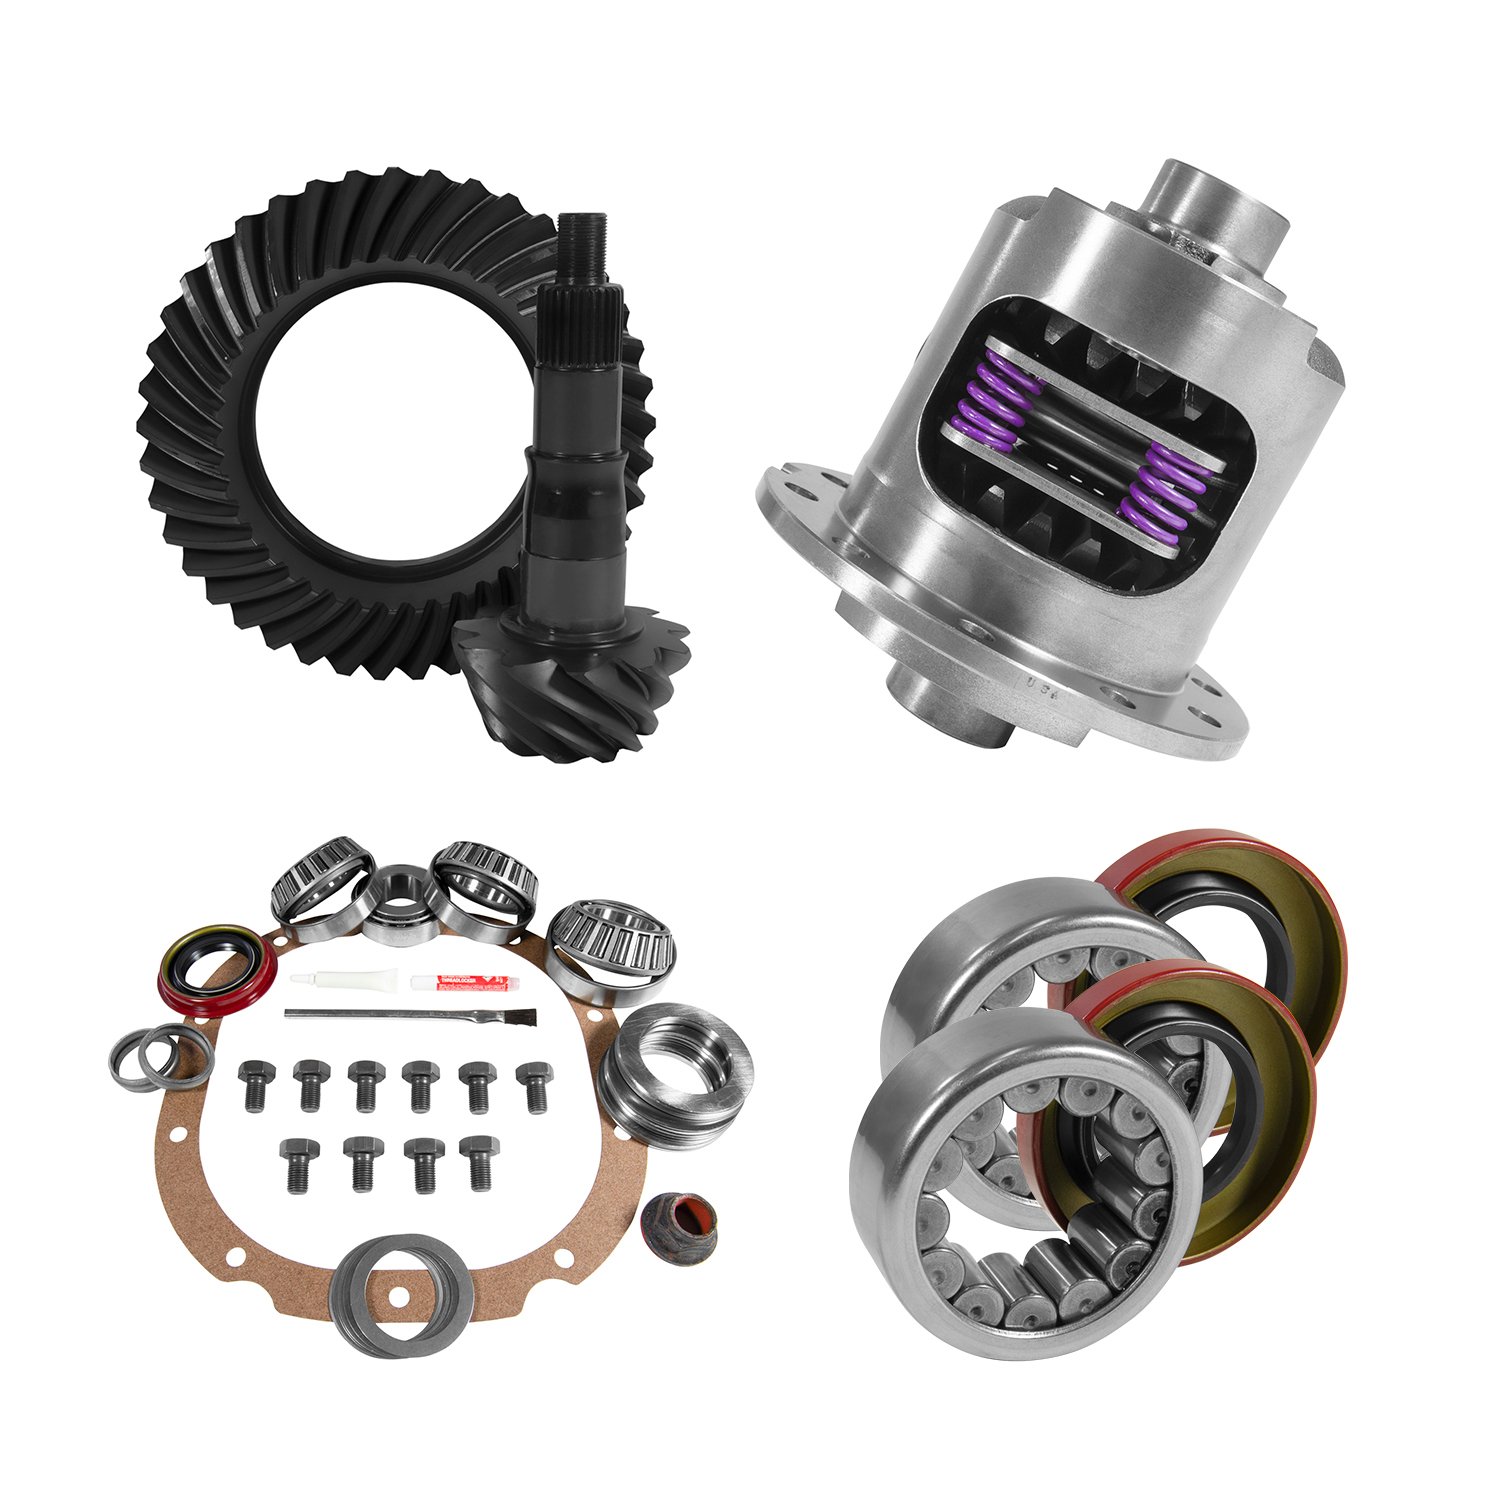 8.8 in. Ford 4.88 Rear Ring & Pinion, Install Kit, 31Spl Posi, 2.99 in. Axle Bearings